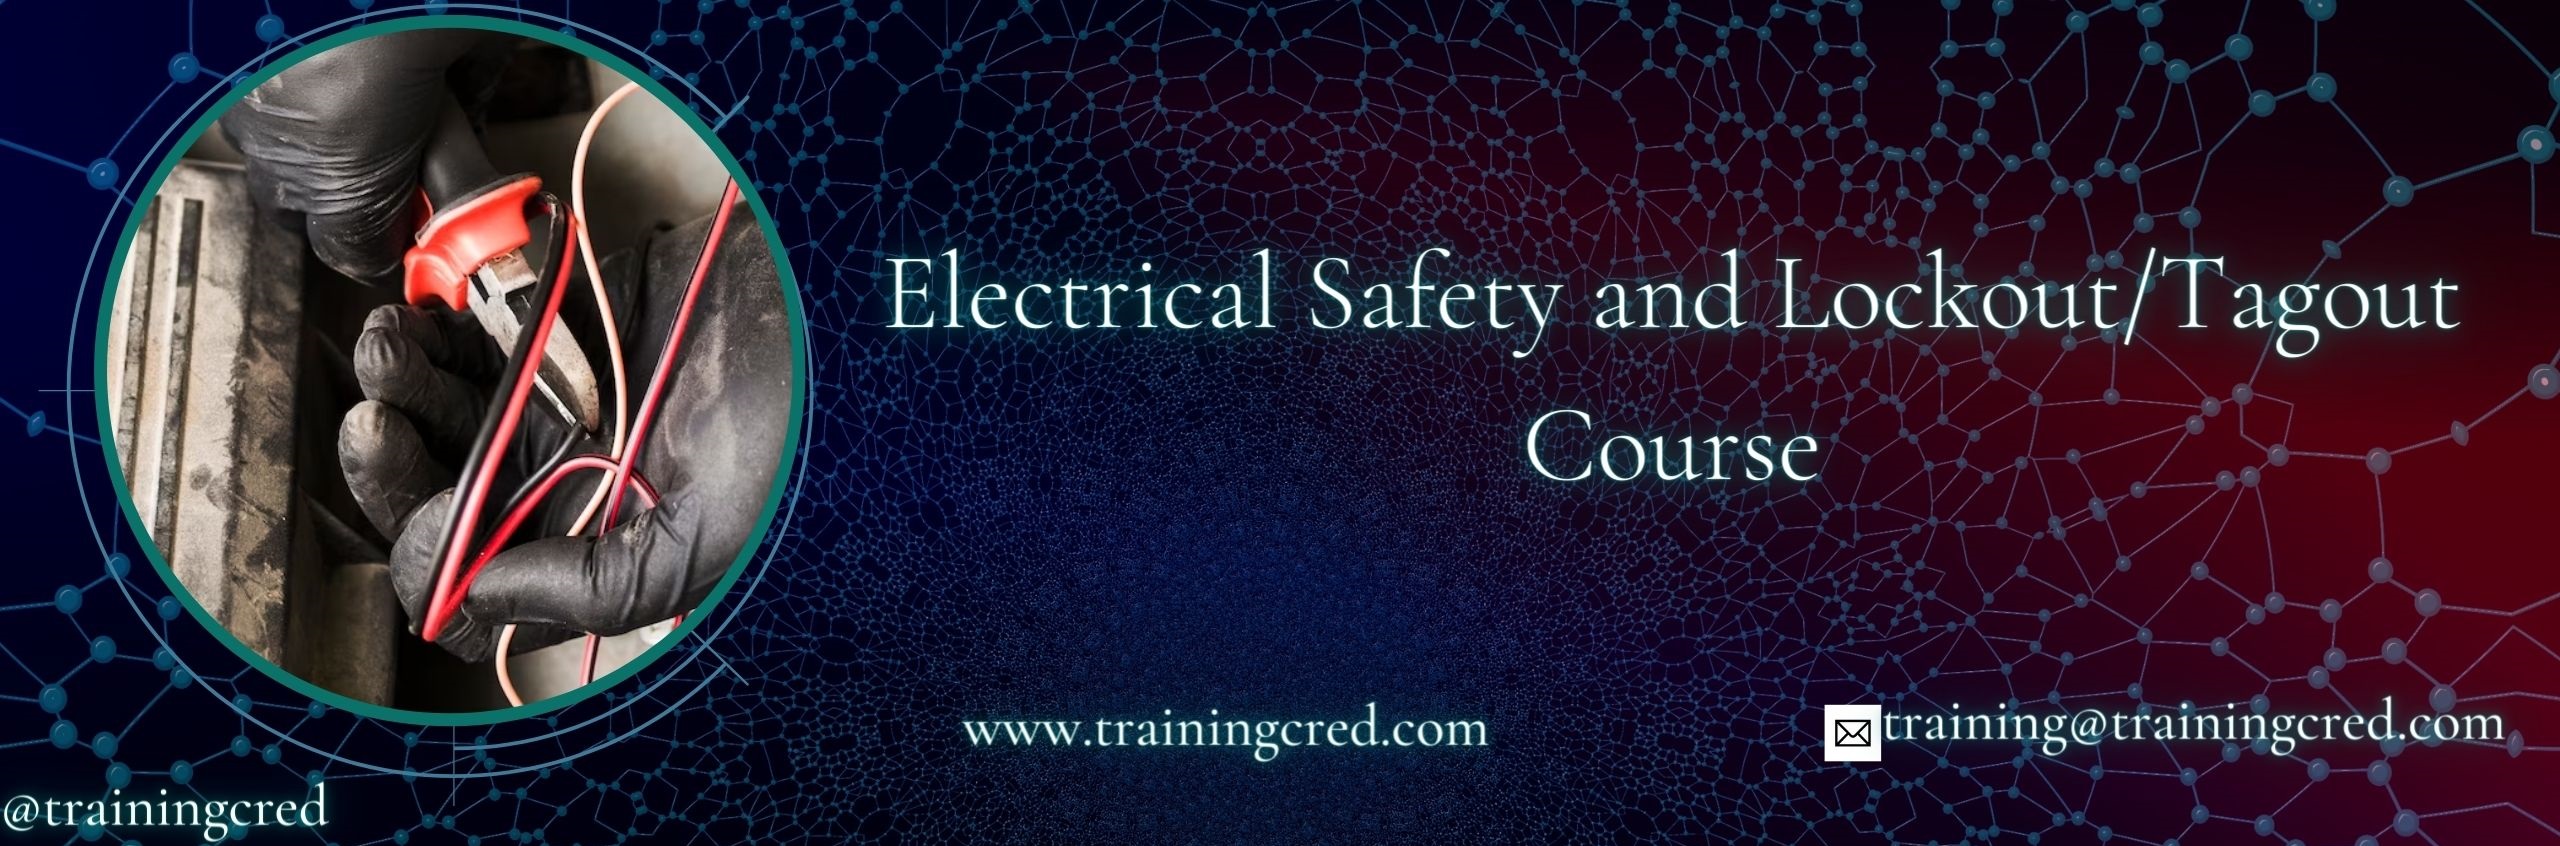 Electrical Safety and Lockout/Tagout Training